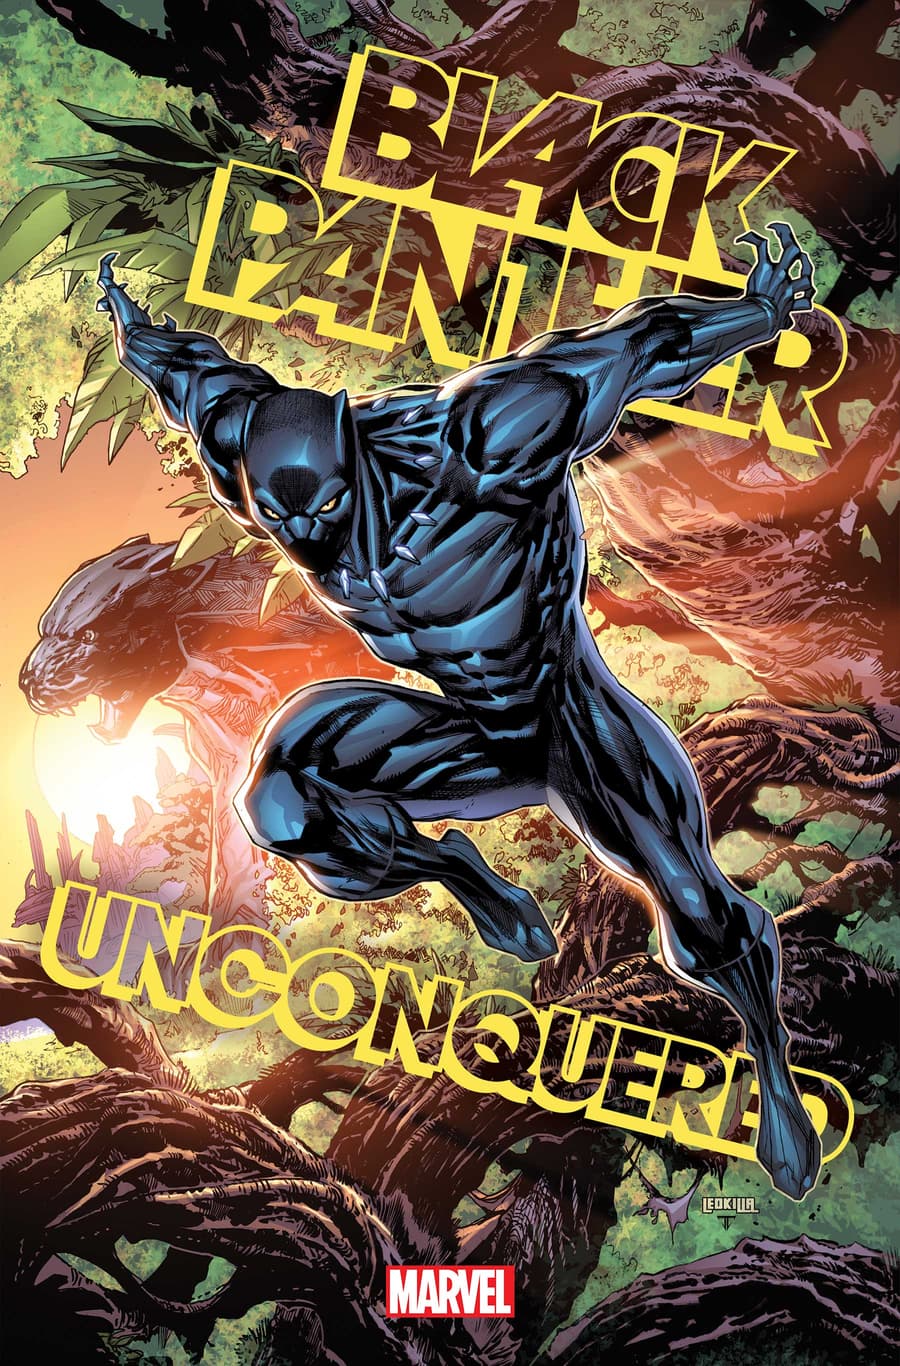 BLACK PANTHER: UNCONQUERED #1 cover by Ken Lashley